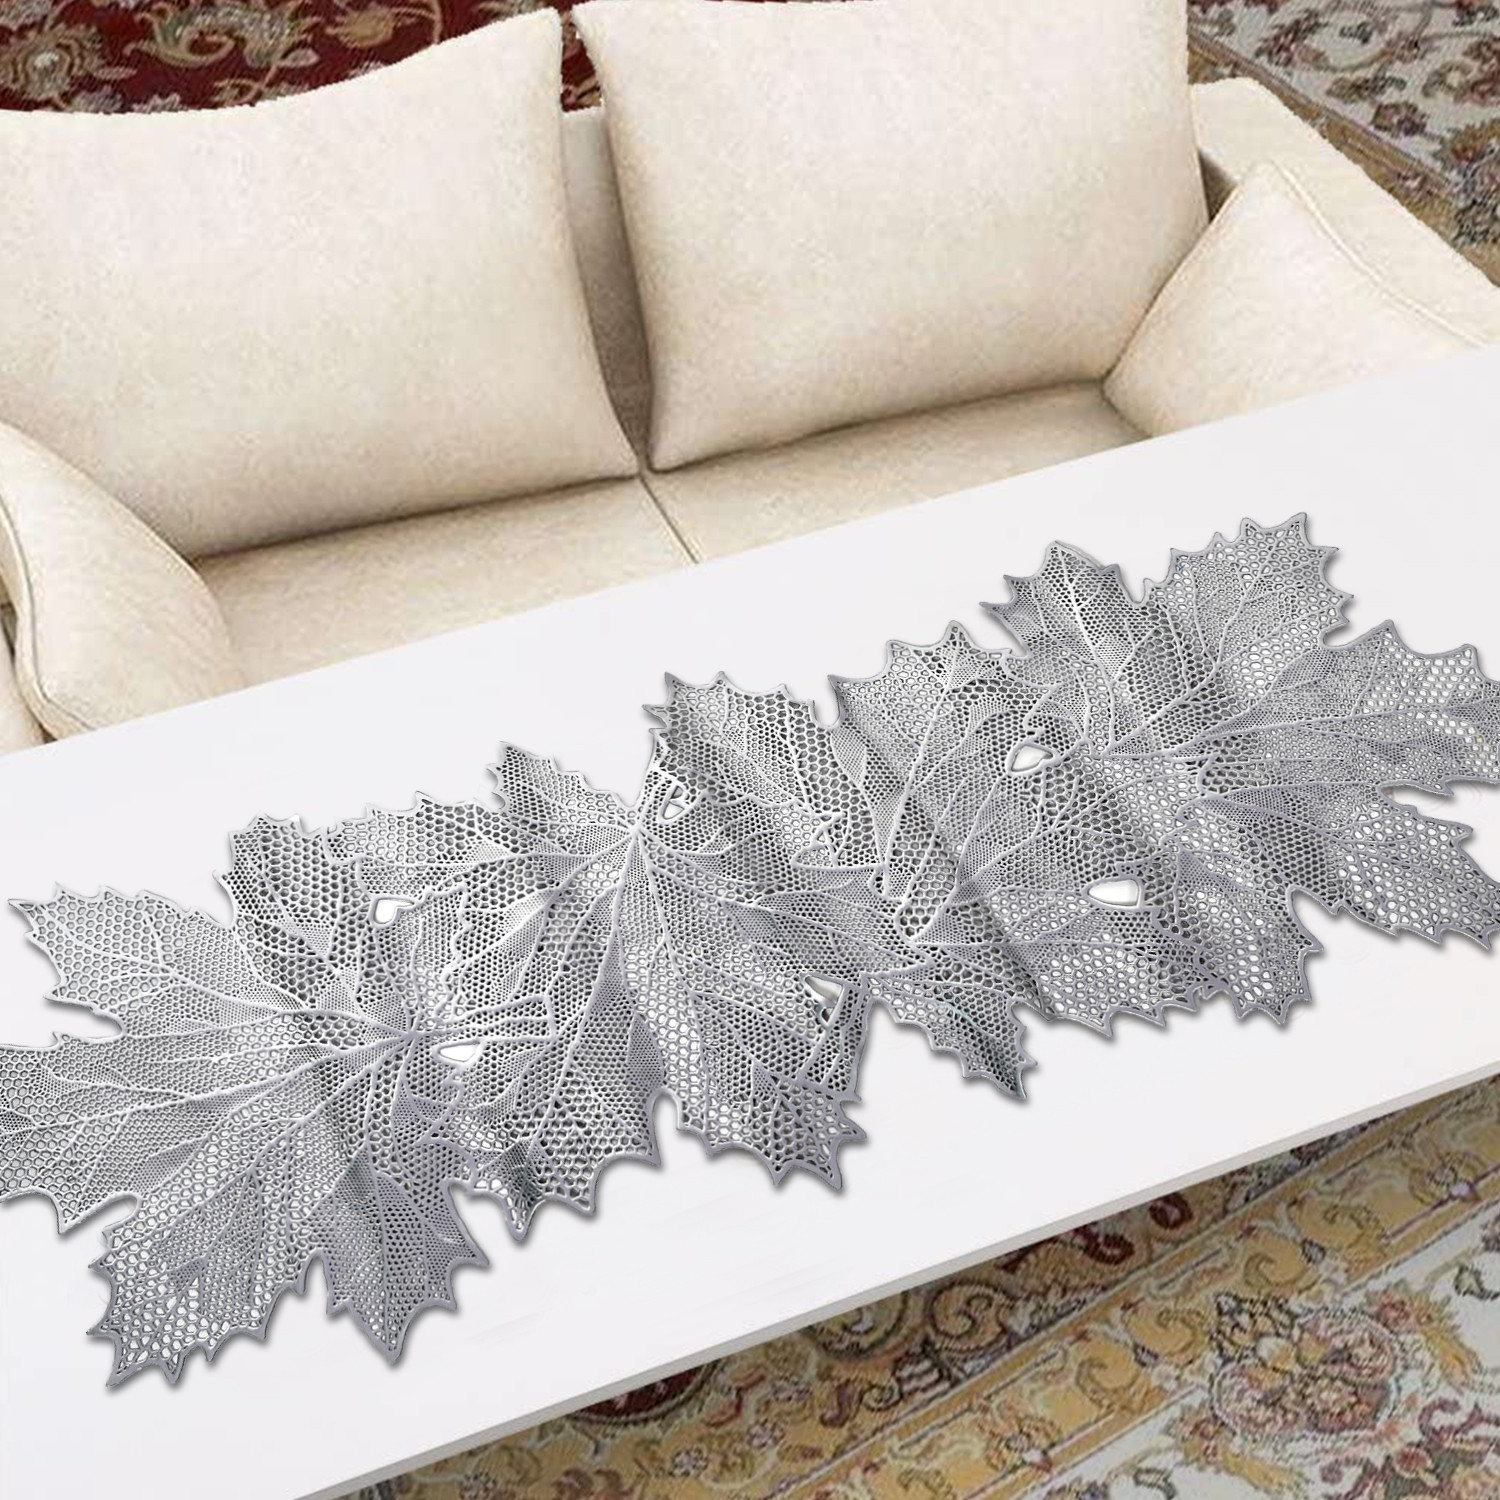 Kuber Industries Leaf Design Soft Leather Table Runner For Patios Family Dinner Office Kitchen Table (Silver)-HS43KUBMART26603